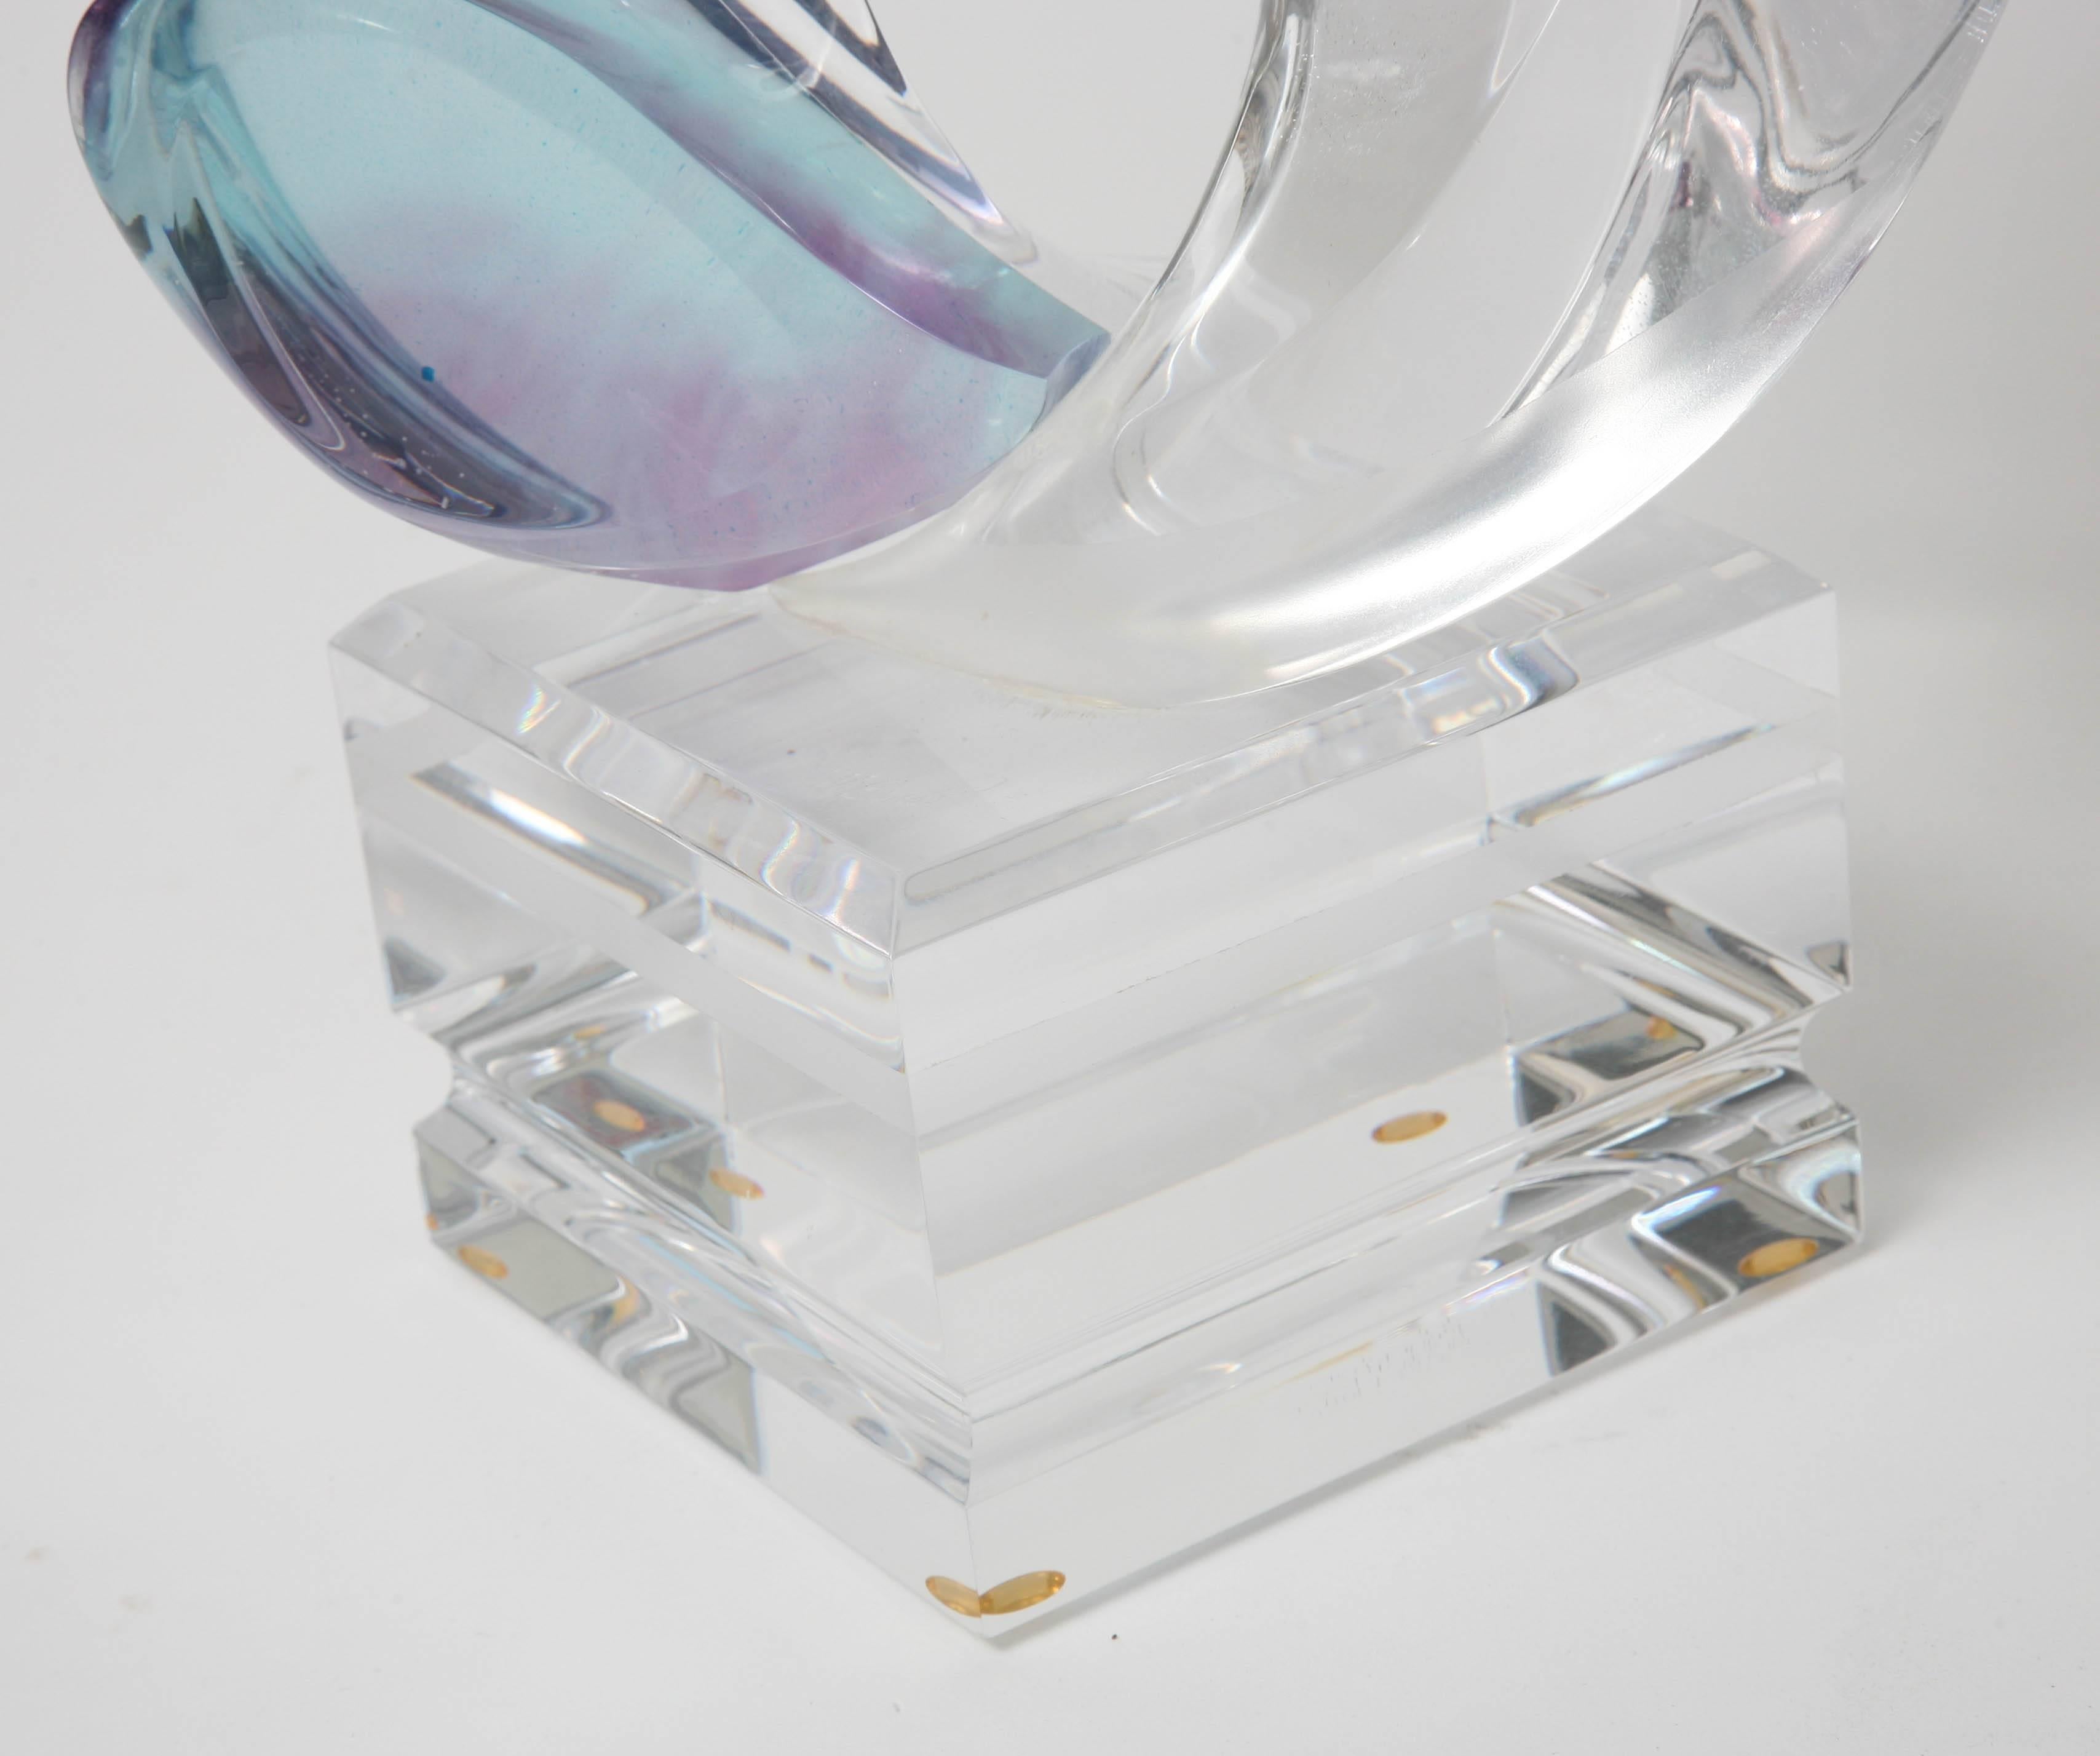 Unknown Multi-Colored Lucite Figural Sculpture of Two Lovers Embracing by Michael Bene